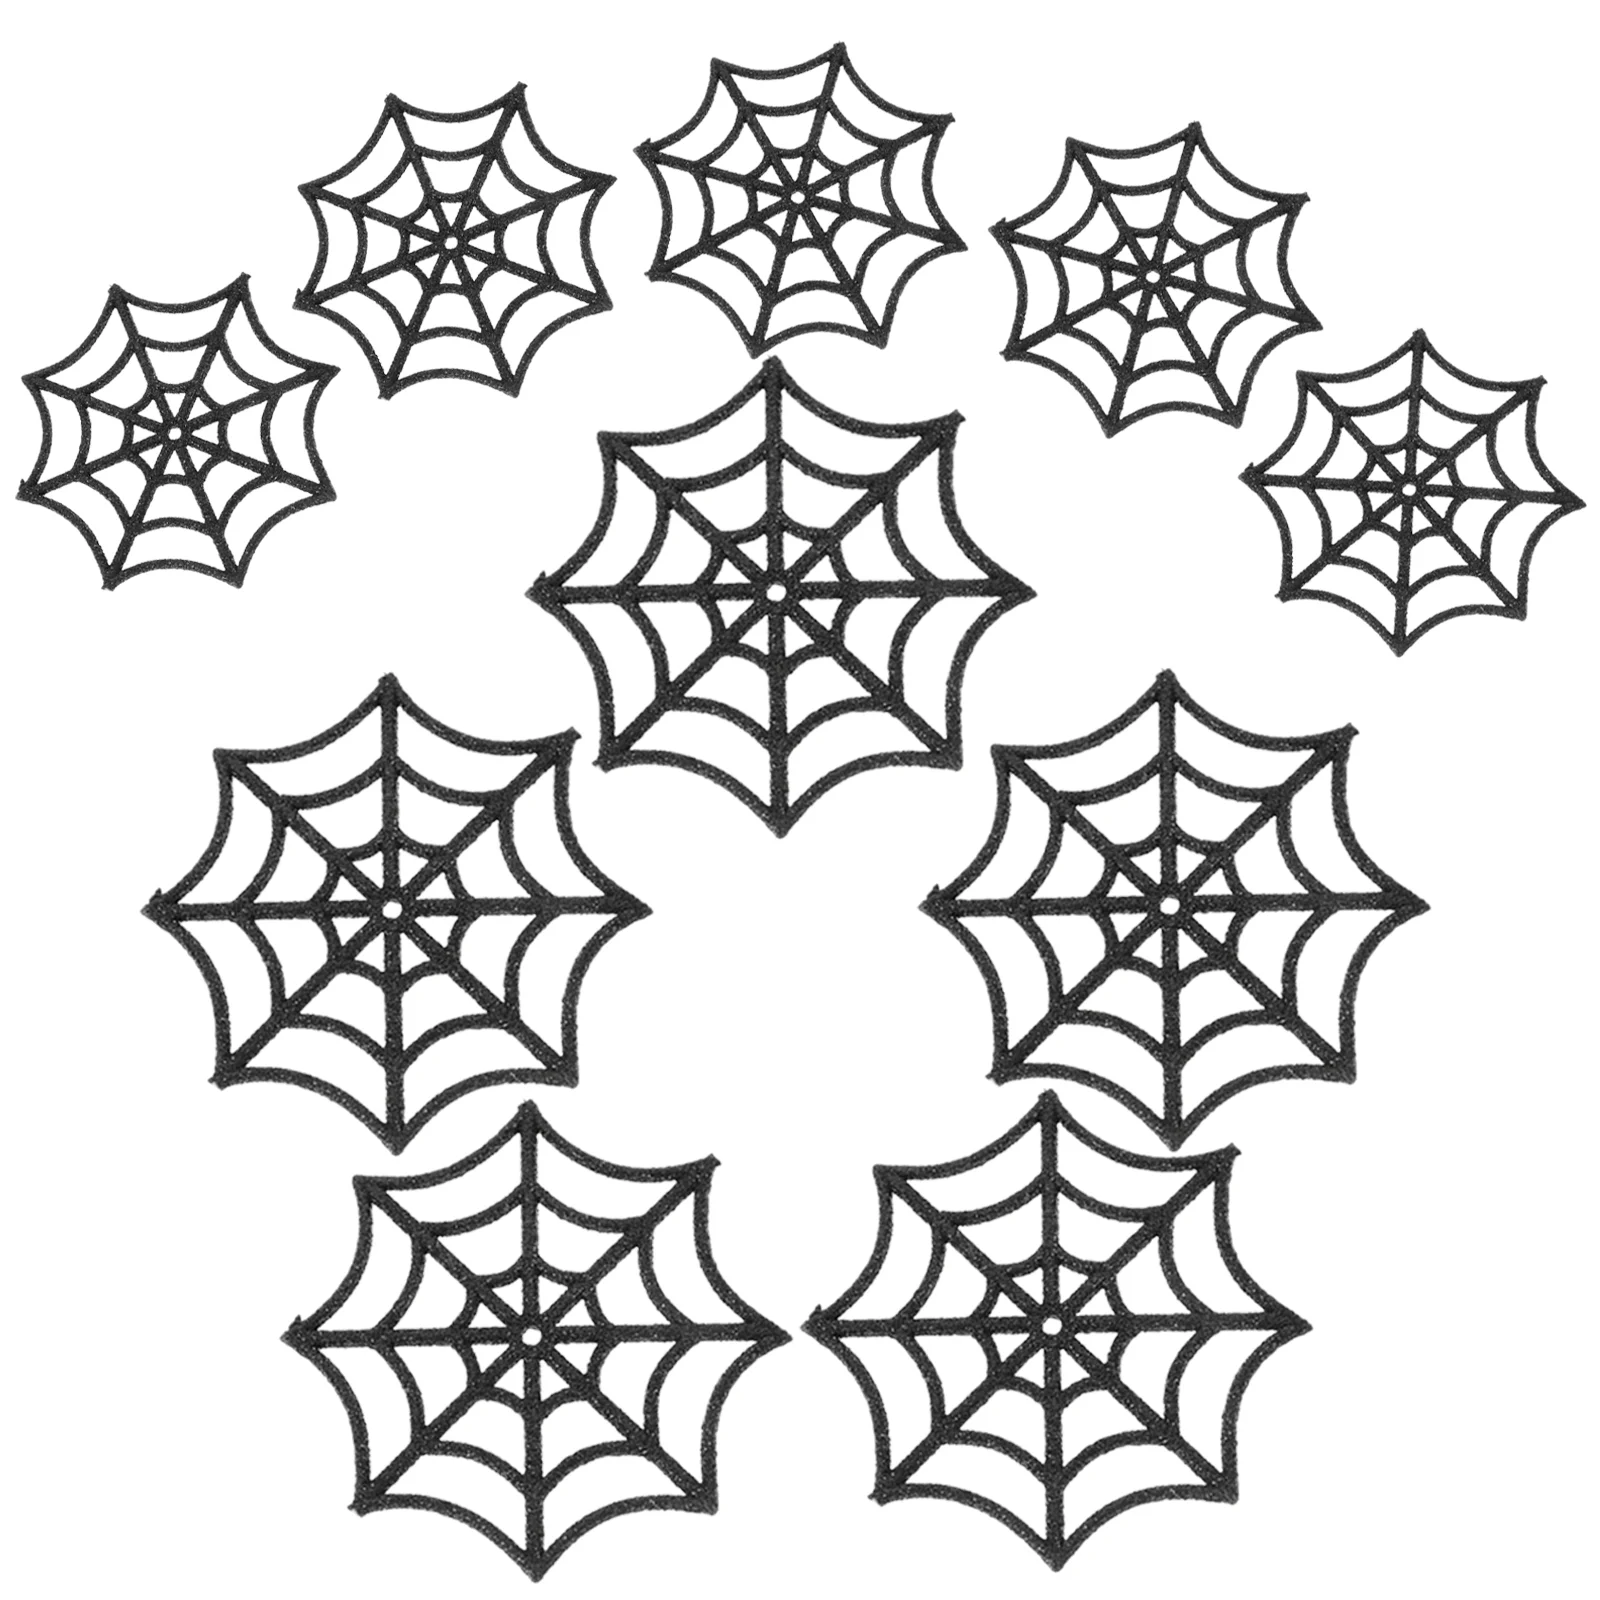 

10 Pcs Black Ornaments Halloween Decorative Props Party Layout Decoration Outdoor Cobweb Plastic Hanging Haunted House Spider